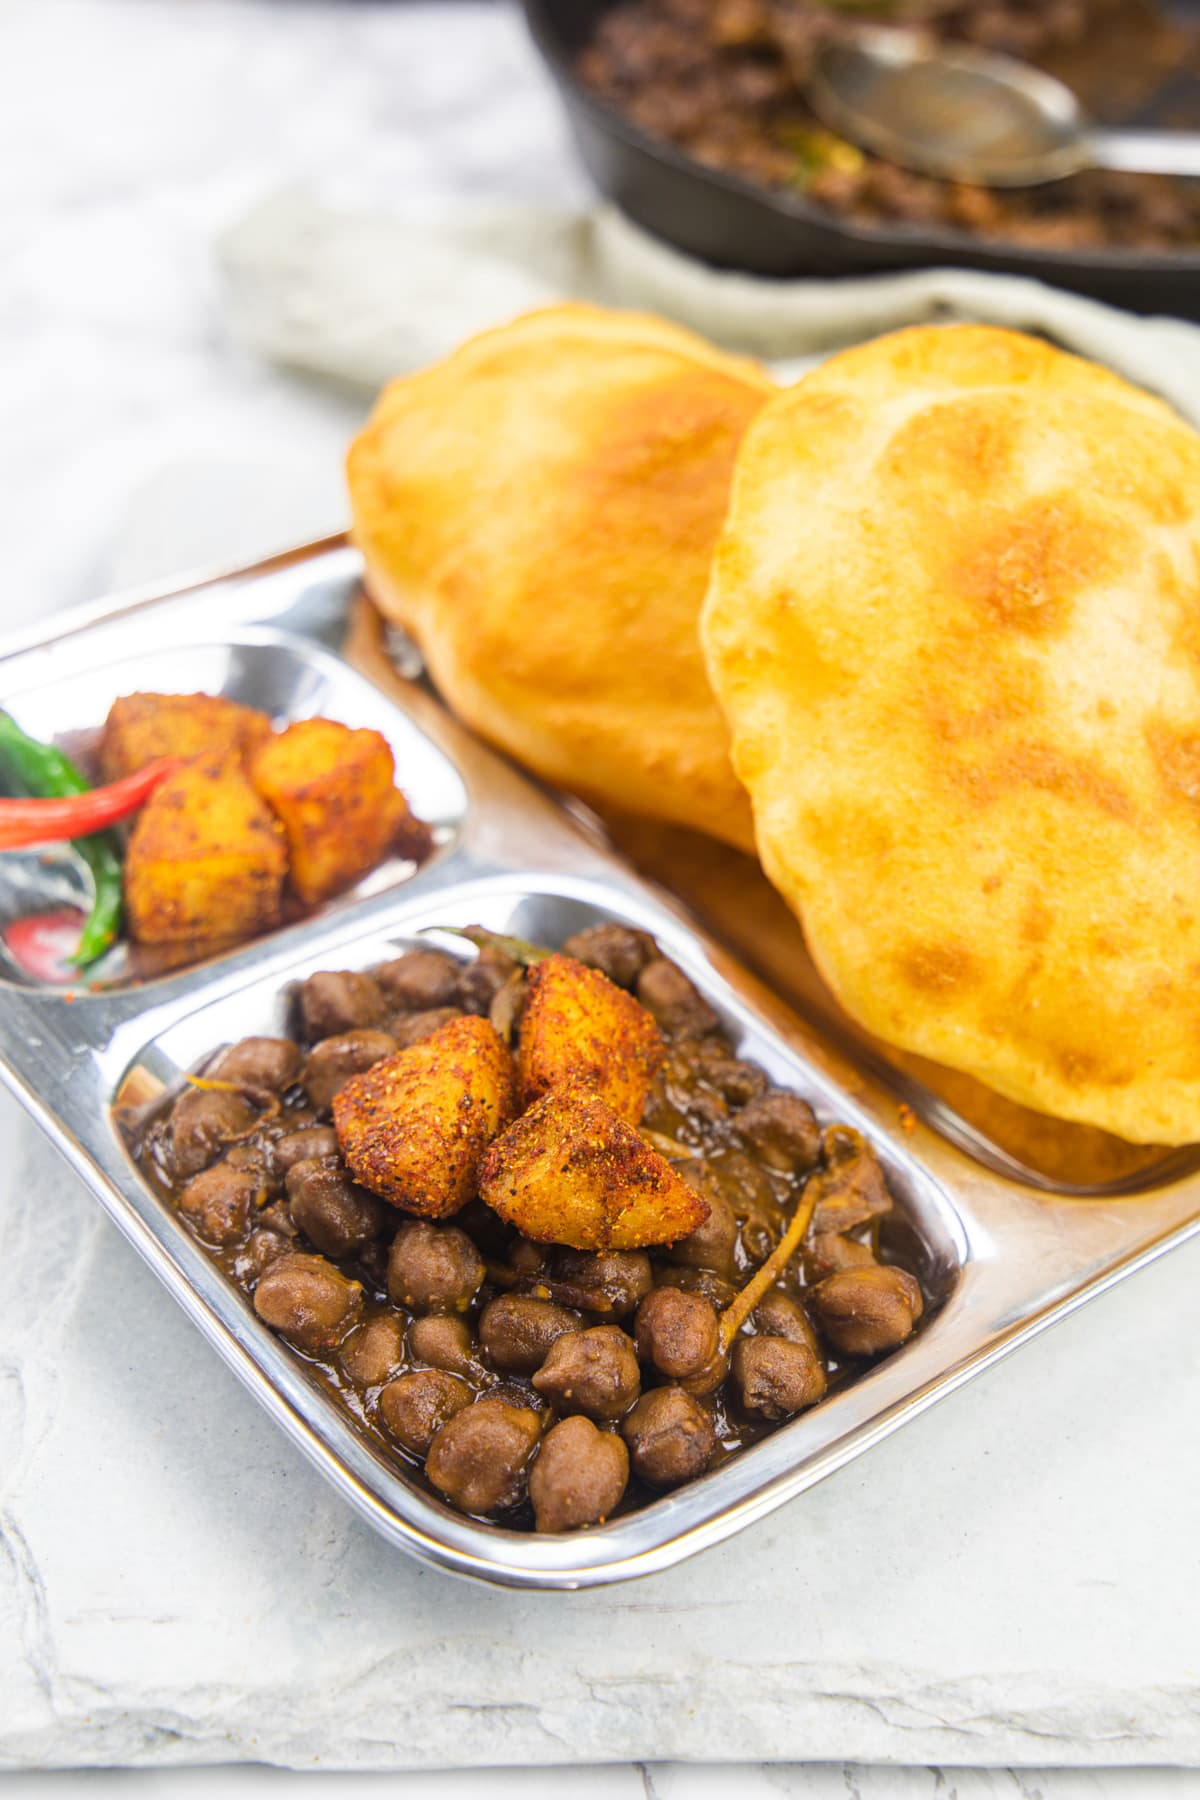 Chole bhature with khatte aloo and bhatura.